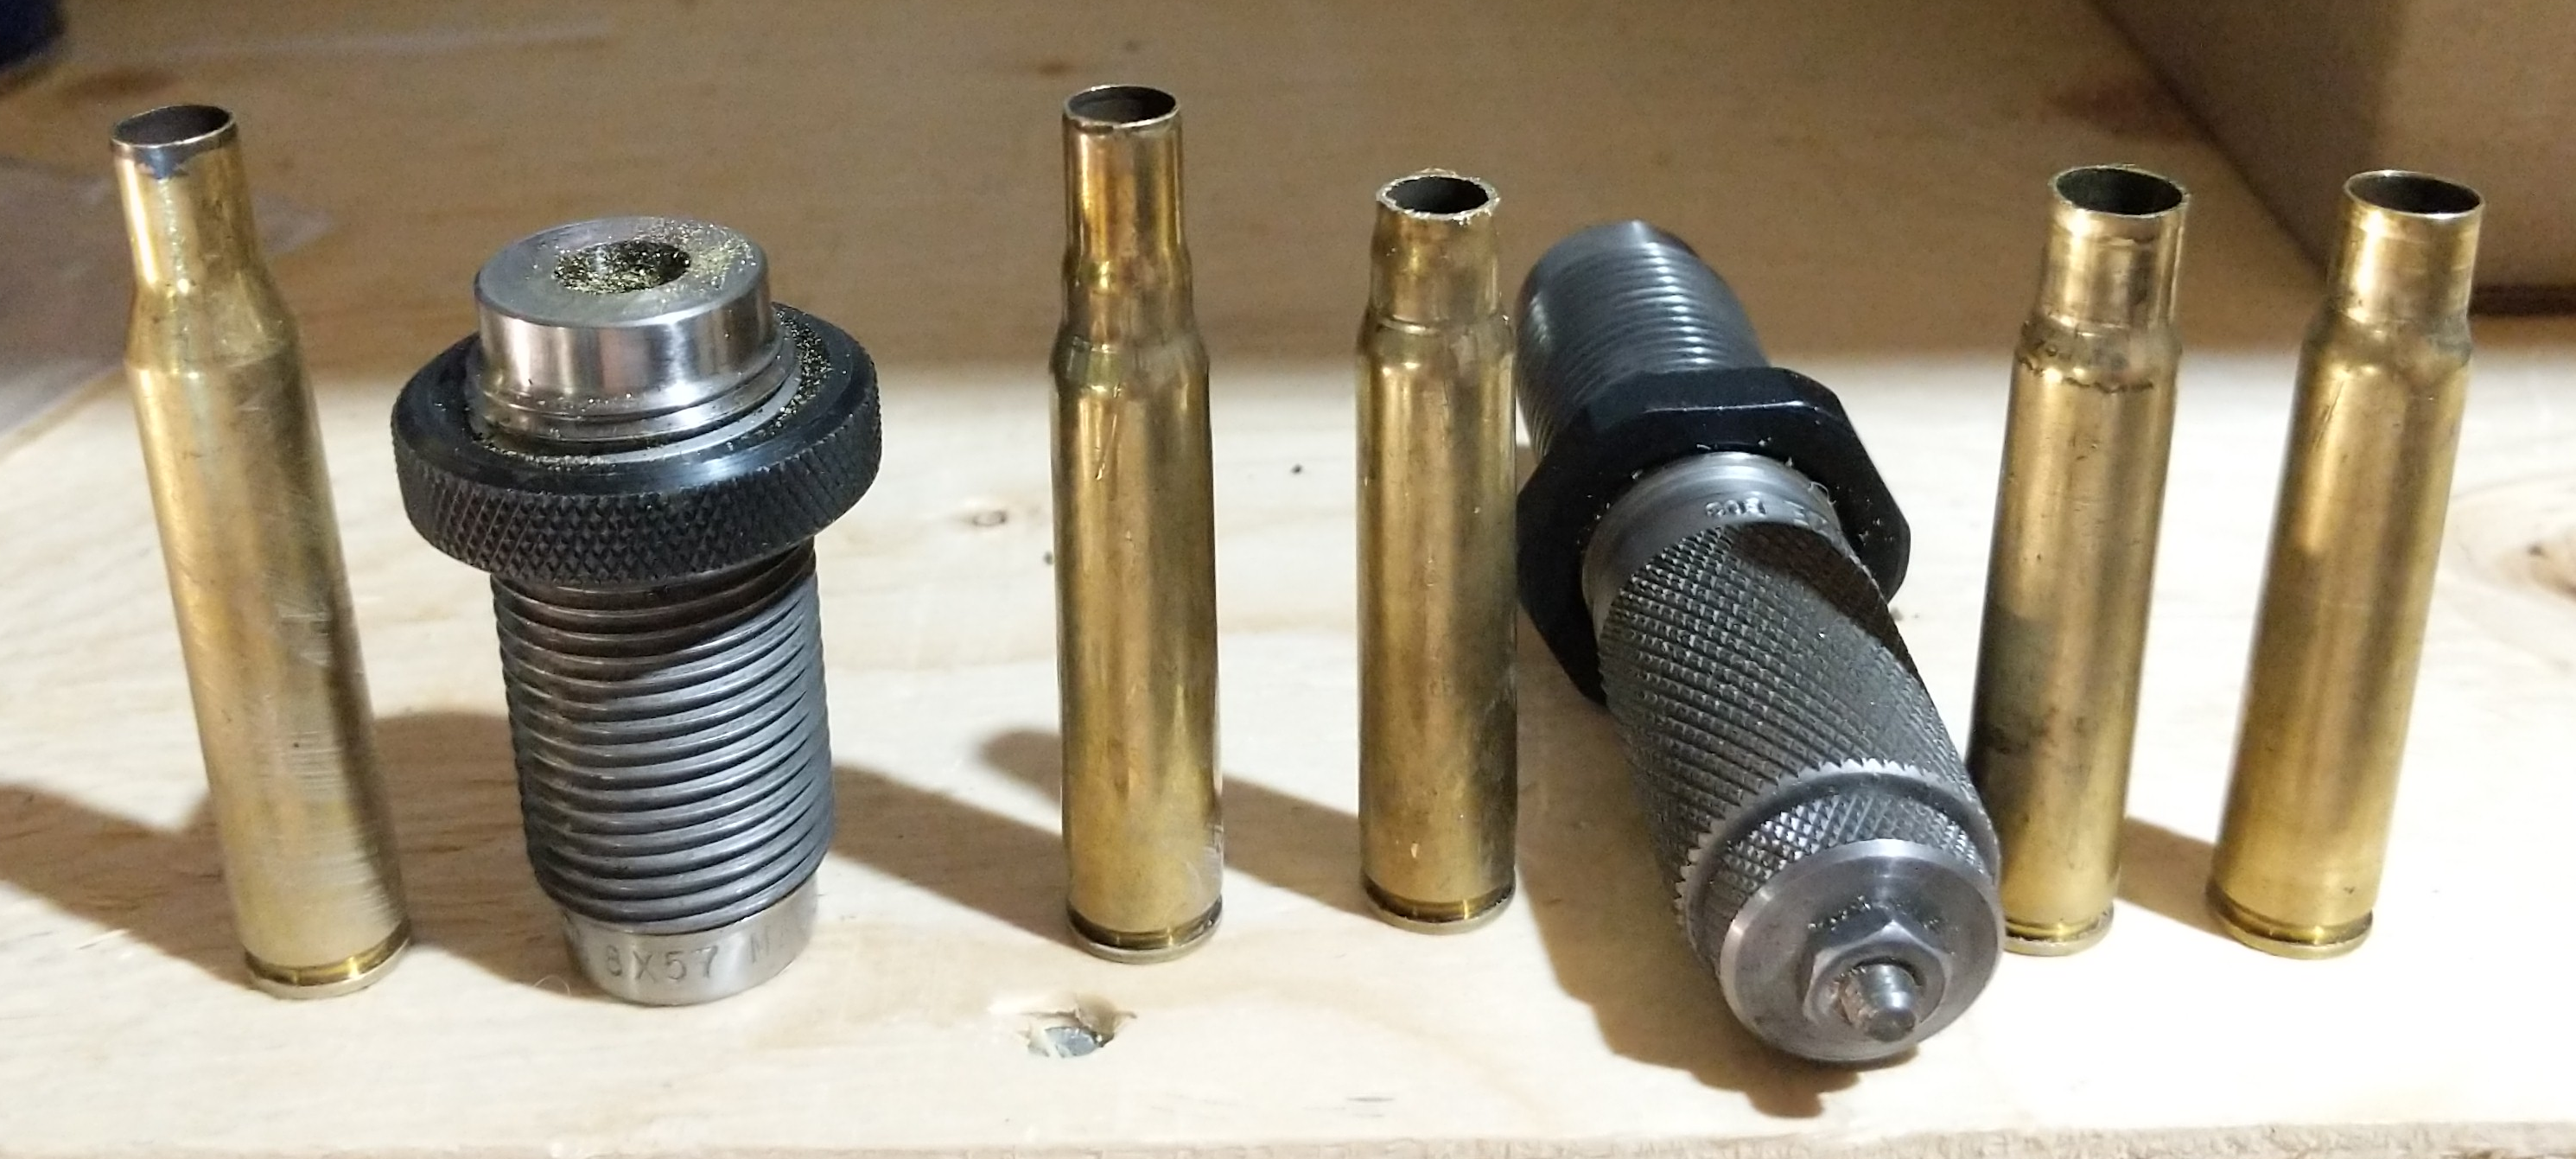 Reforming .270 Winchester to 8mm Mauser